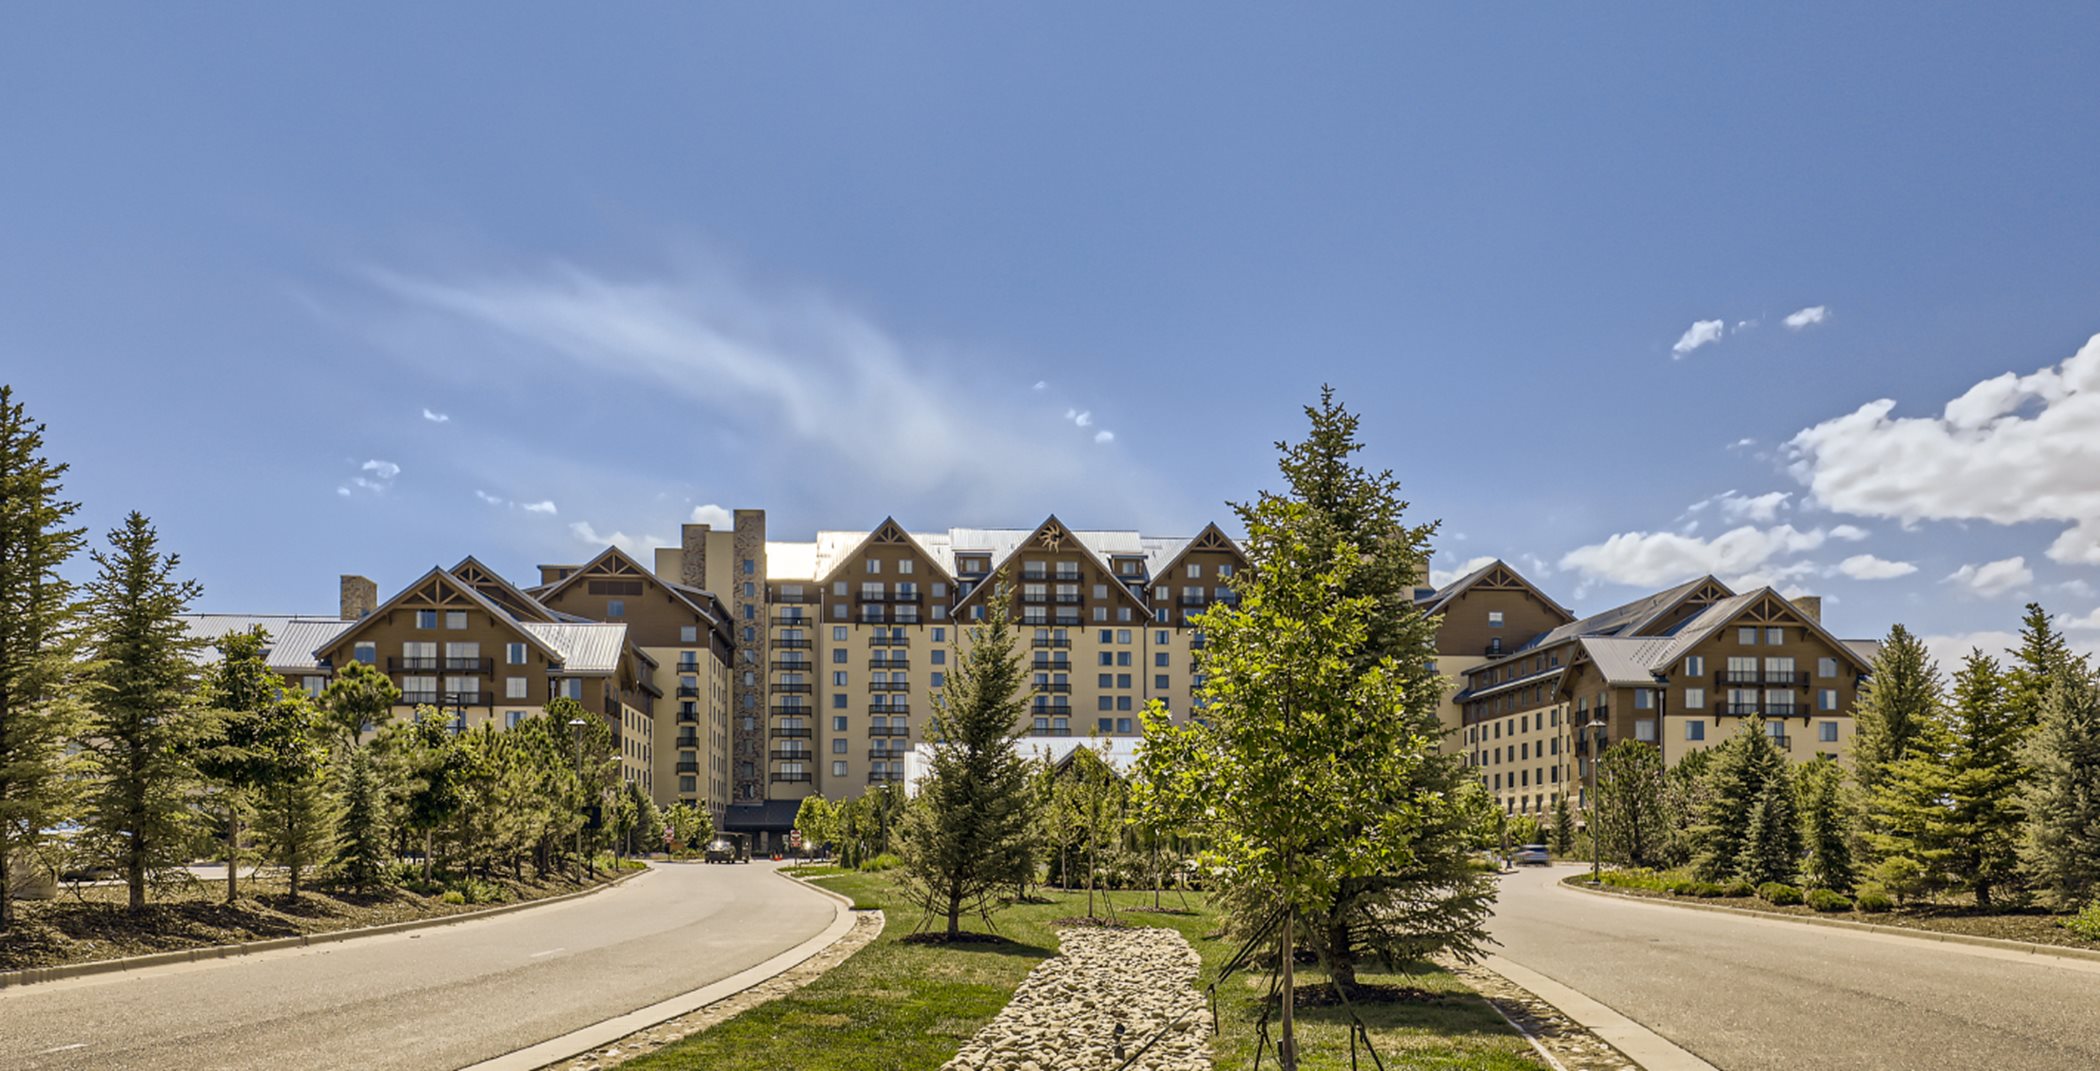  Gaylord Rockies Resort & Convention Center